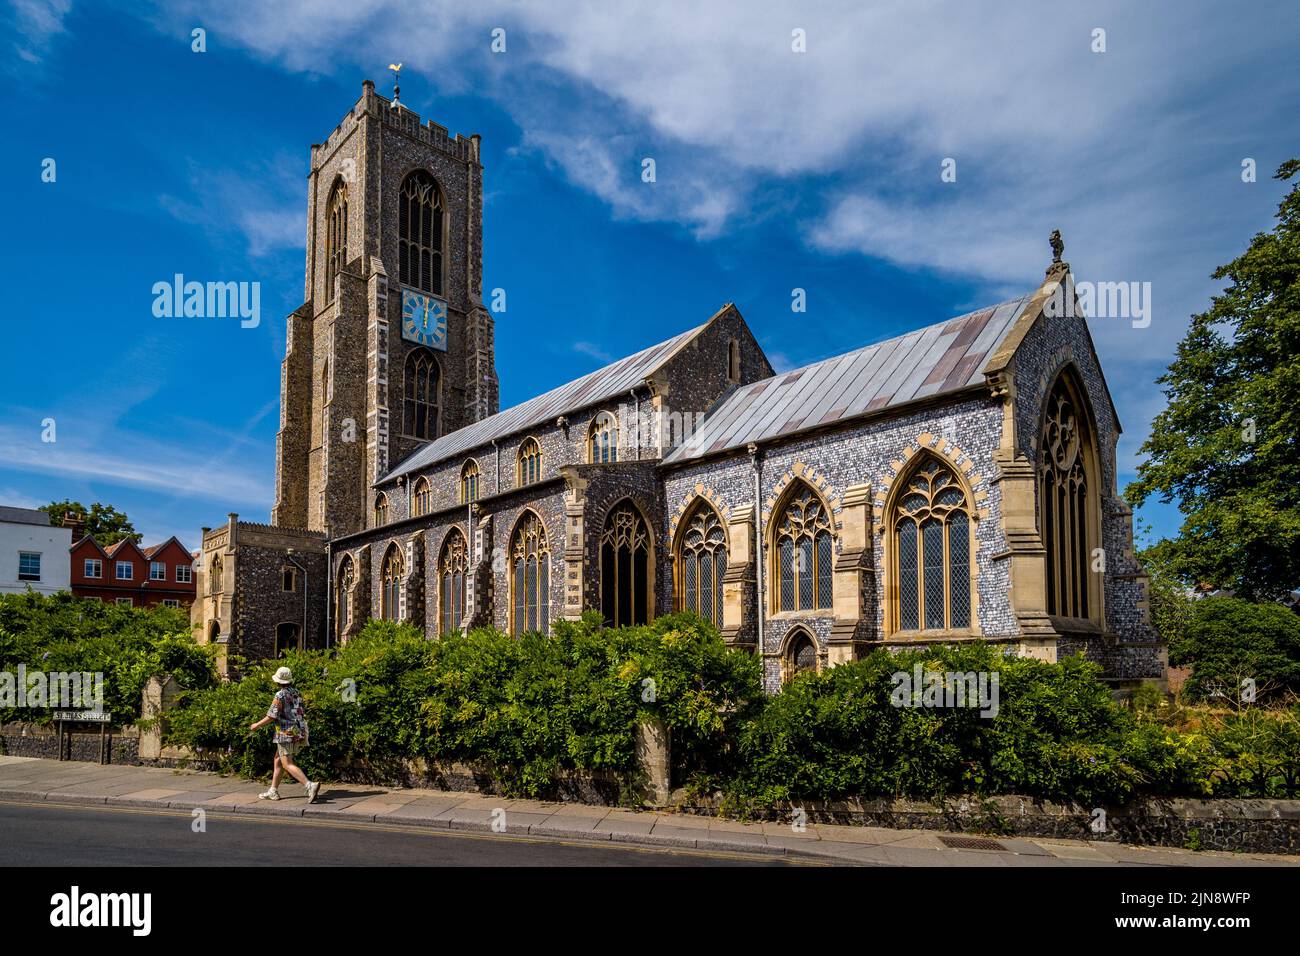 St Giles' Church Norwich is a Church of England Grade I listed parish church in Norwich UK - medieval with c19th restoration. St Giles on the Hill. Stock Photo